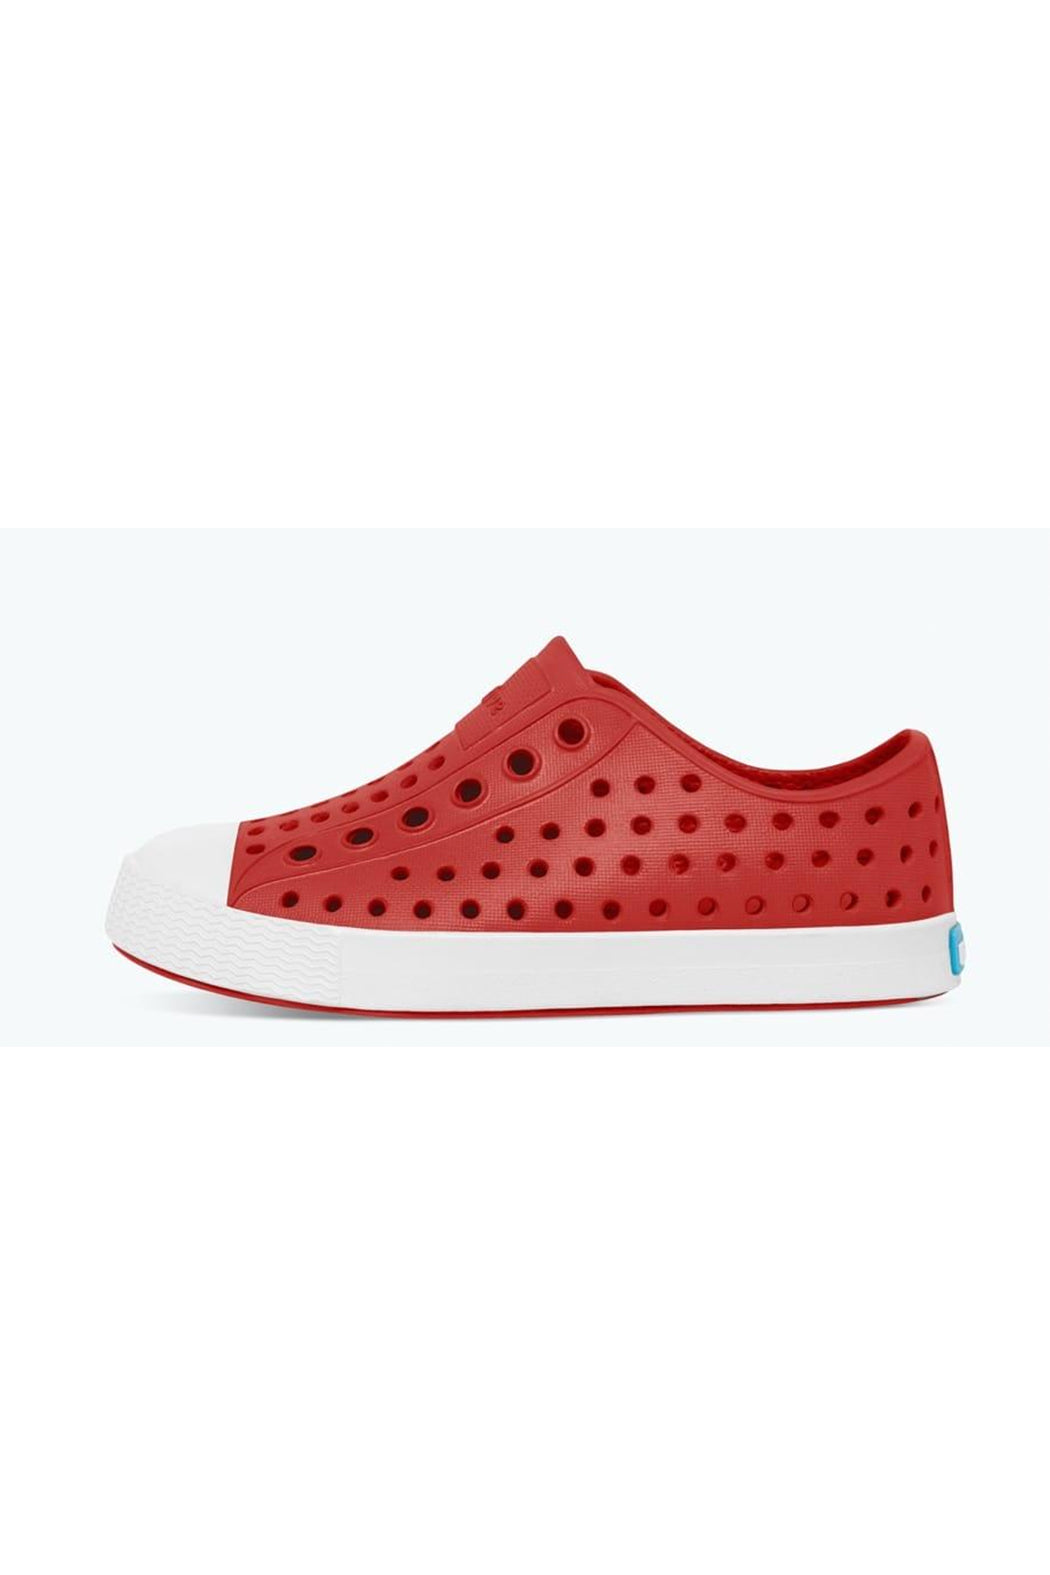 Native Jefferson Little Kid Shoes - Torch Red/Shell White